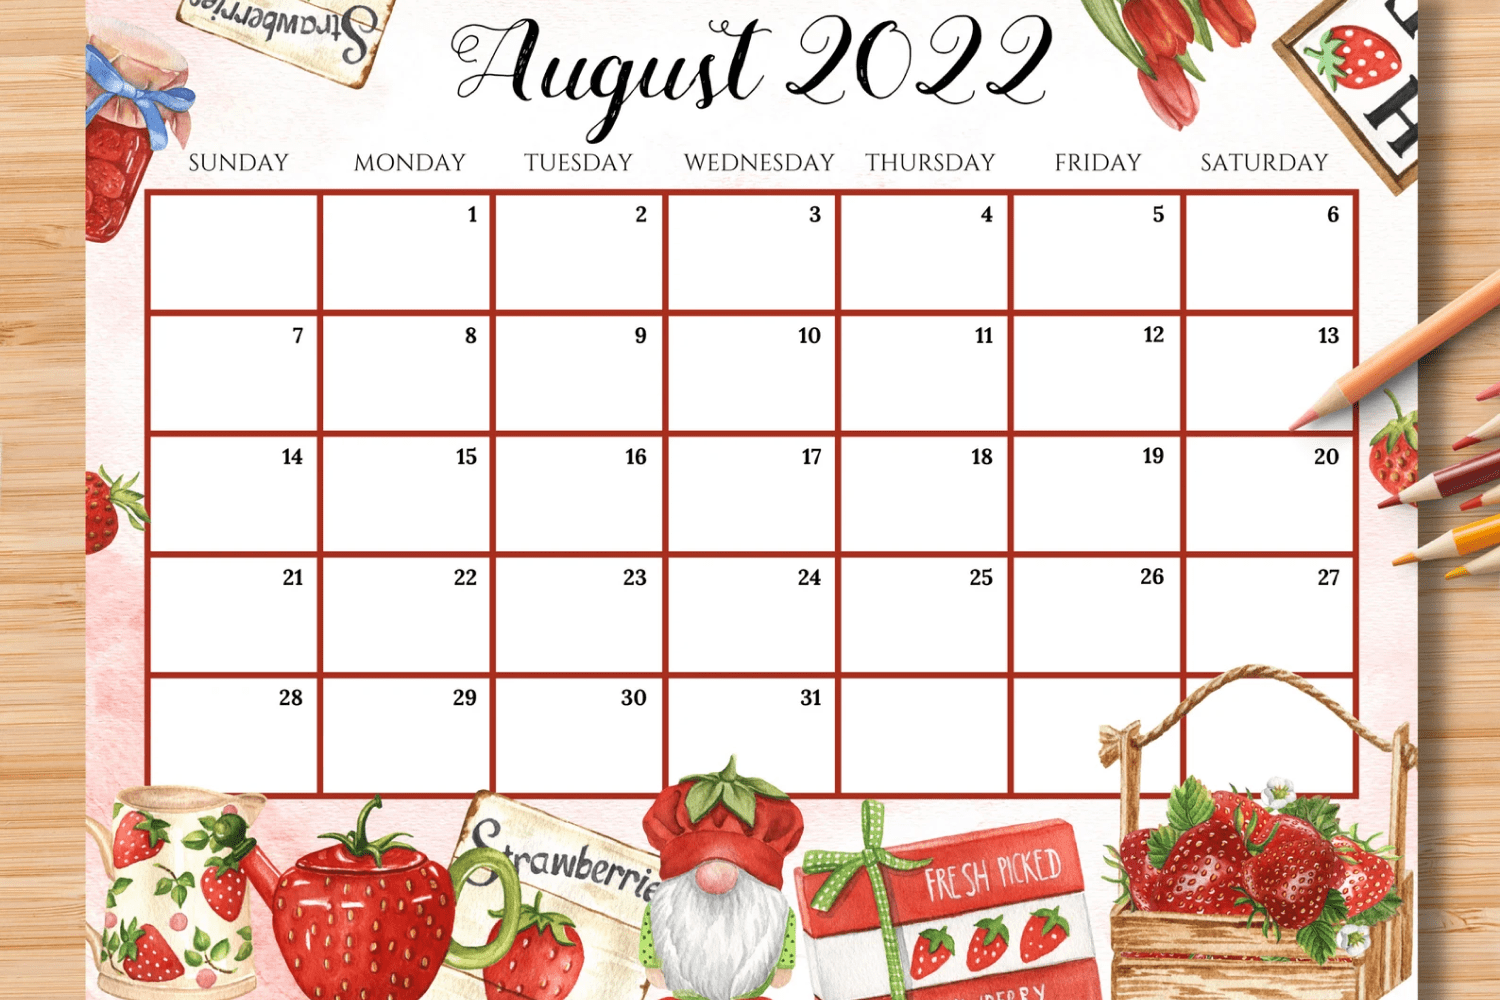 Calendar with drawn strawberries and teapot.